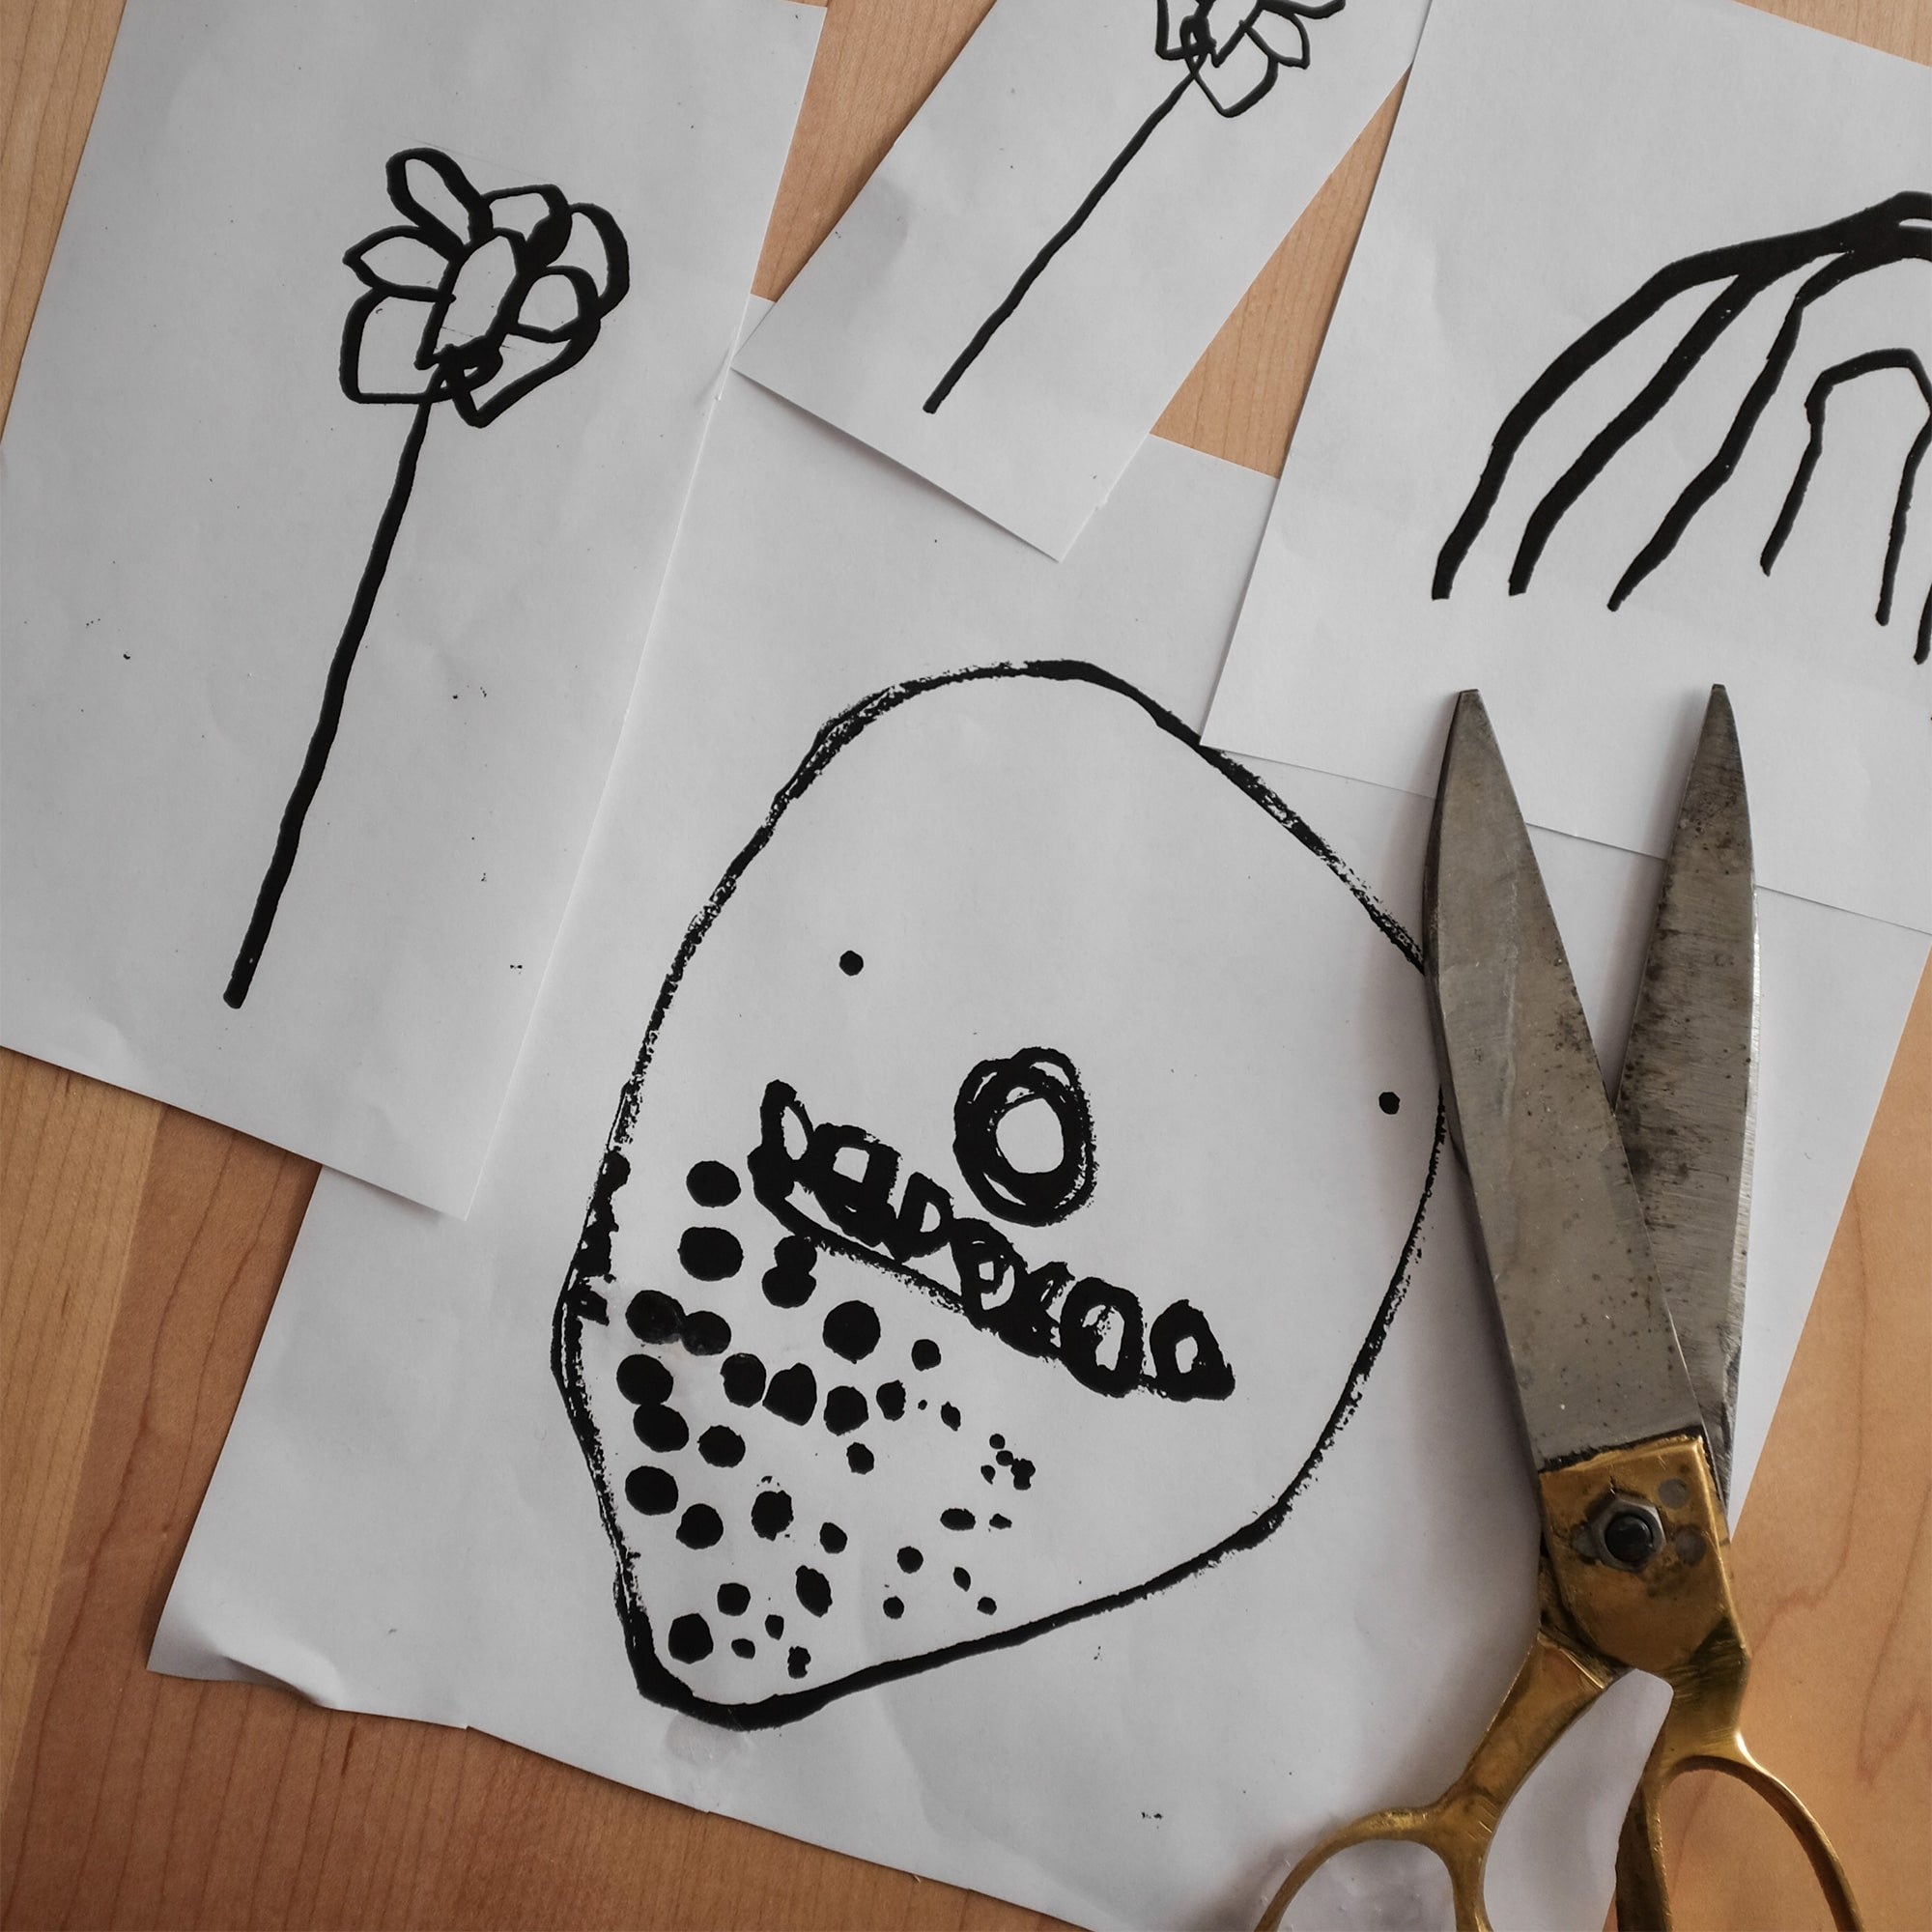 How to Preserve Our Little Ones' Drawings With Image Transferring